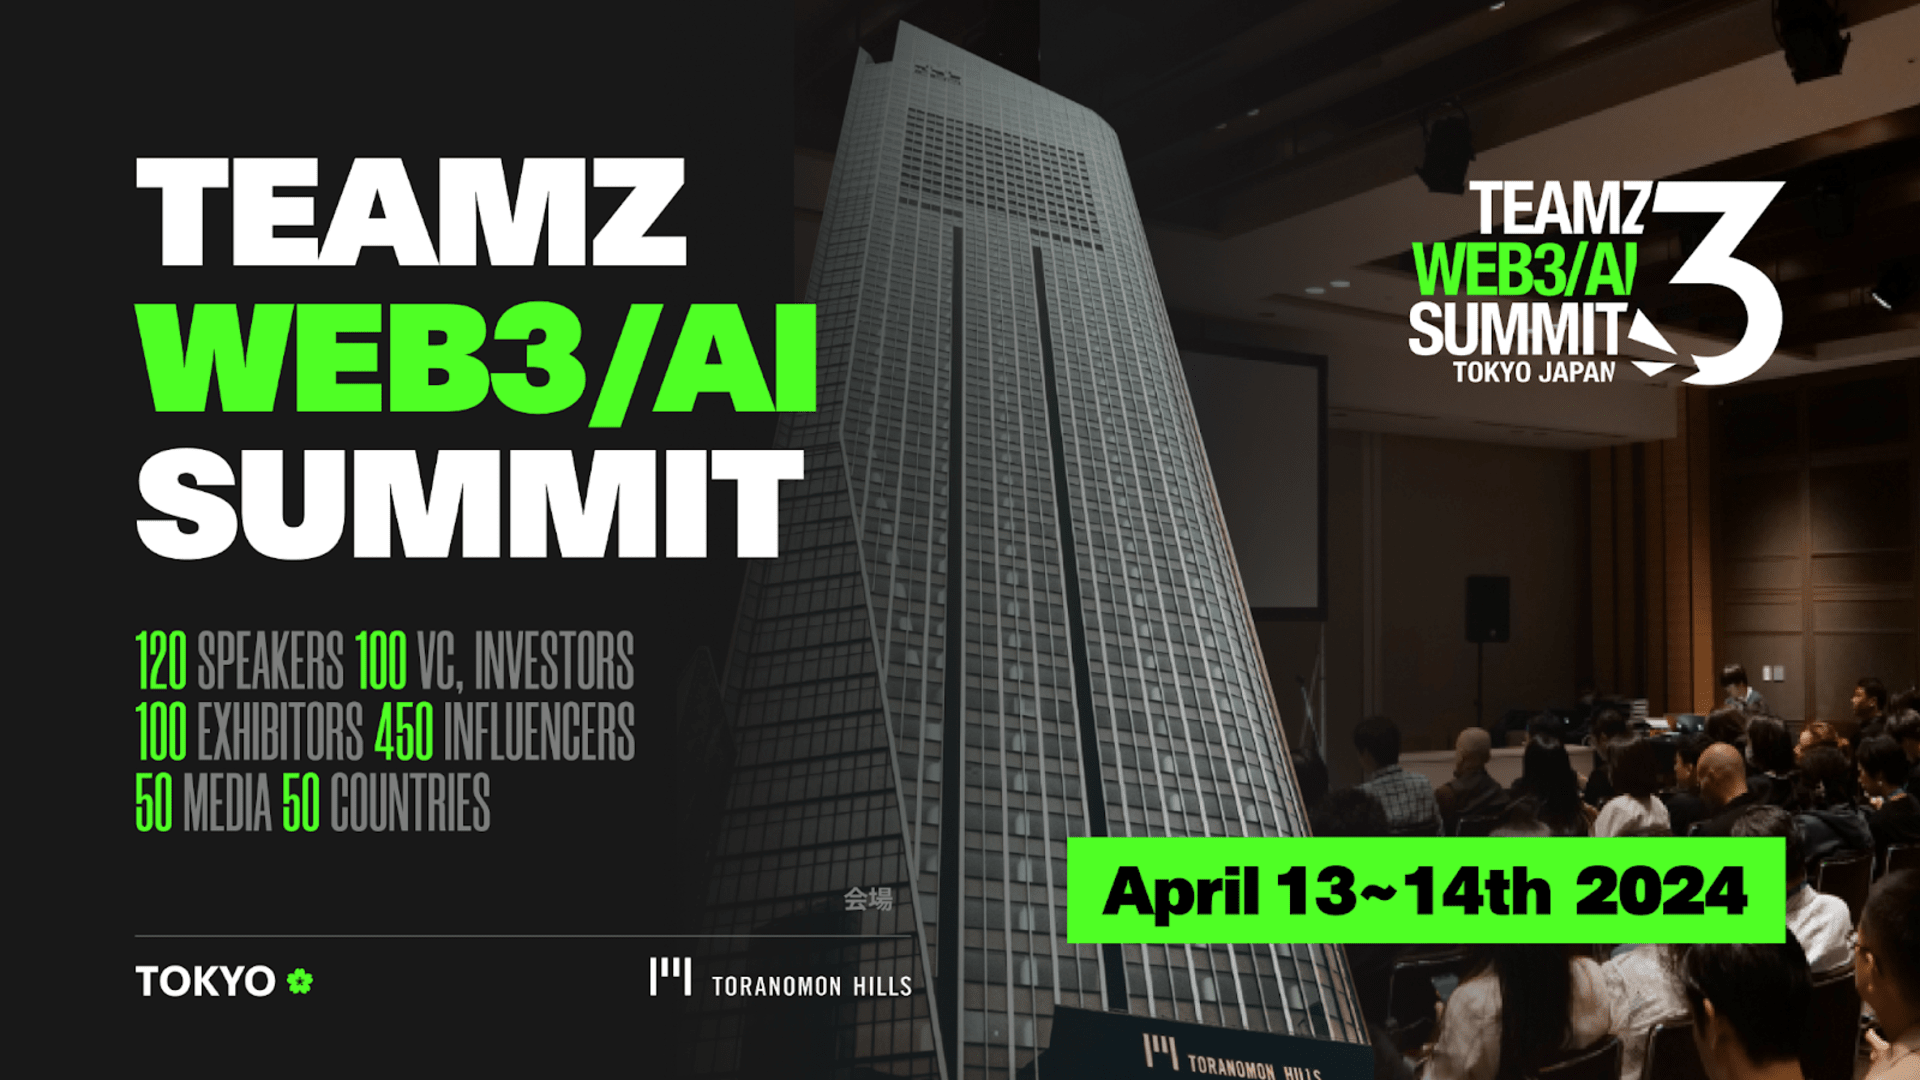 Get Ready! TEAMZ WEB3/AI SUMMIT 2024 in Japan is on the Horizon!